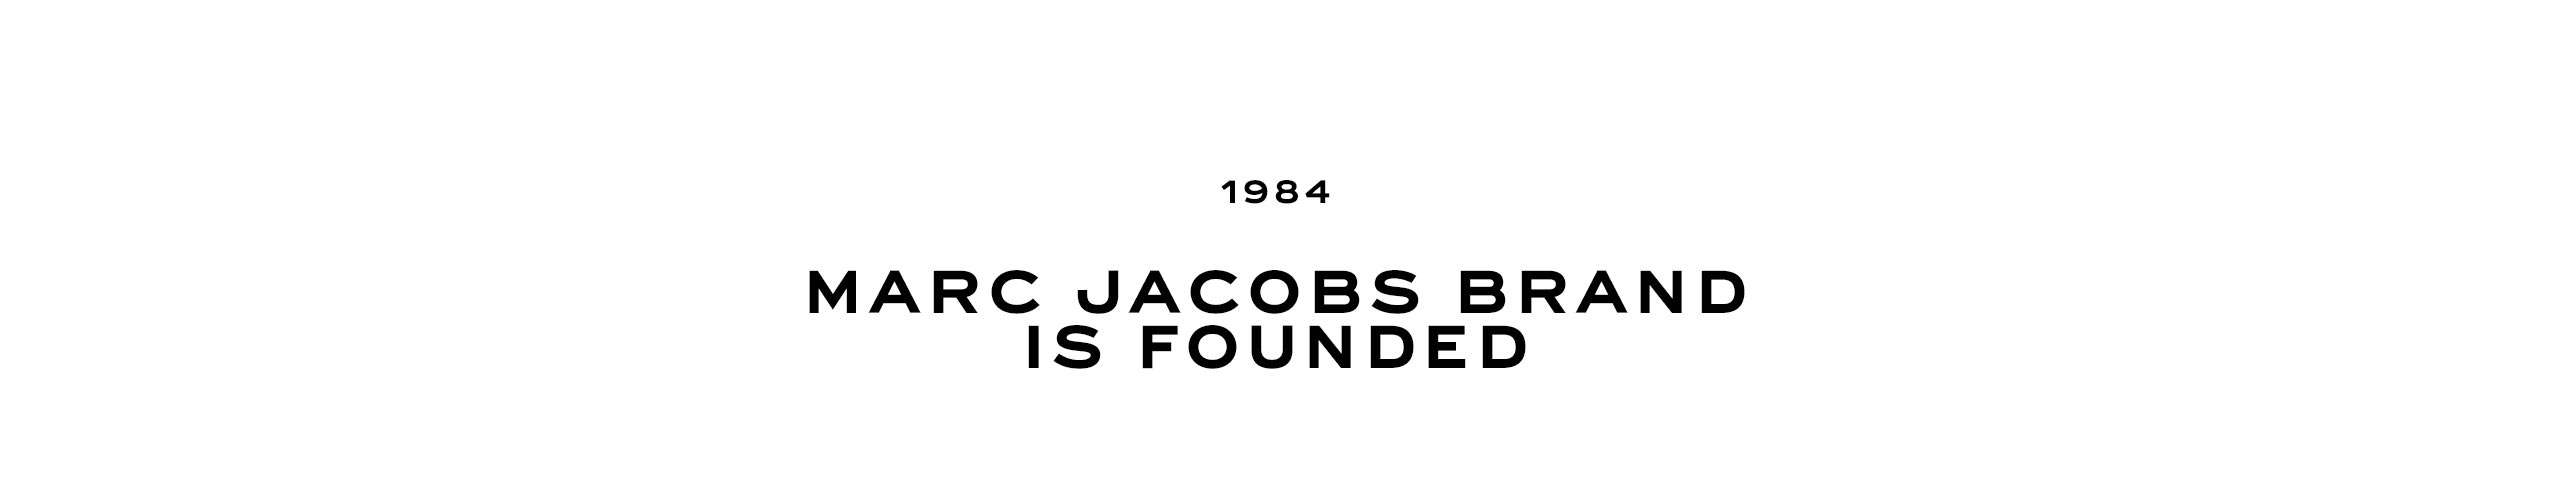 New Brand Identity: Marc Jacobs by Triboro — BP&O